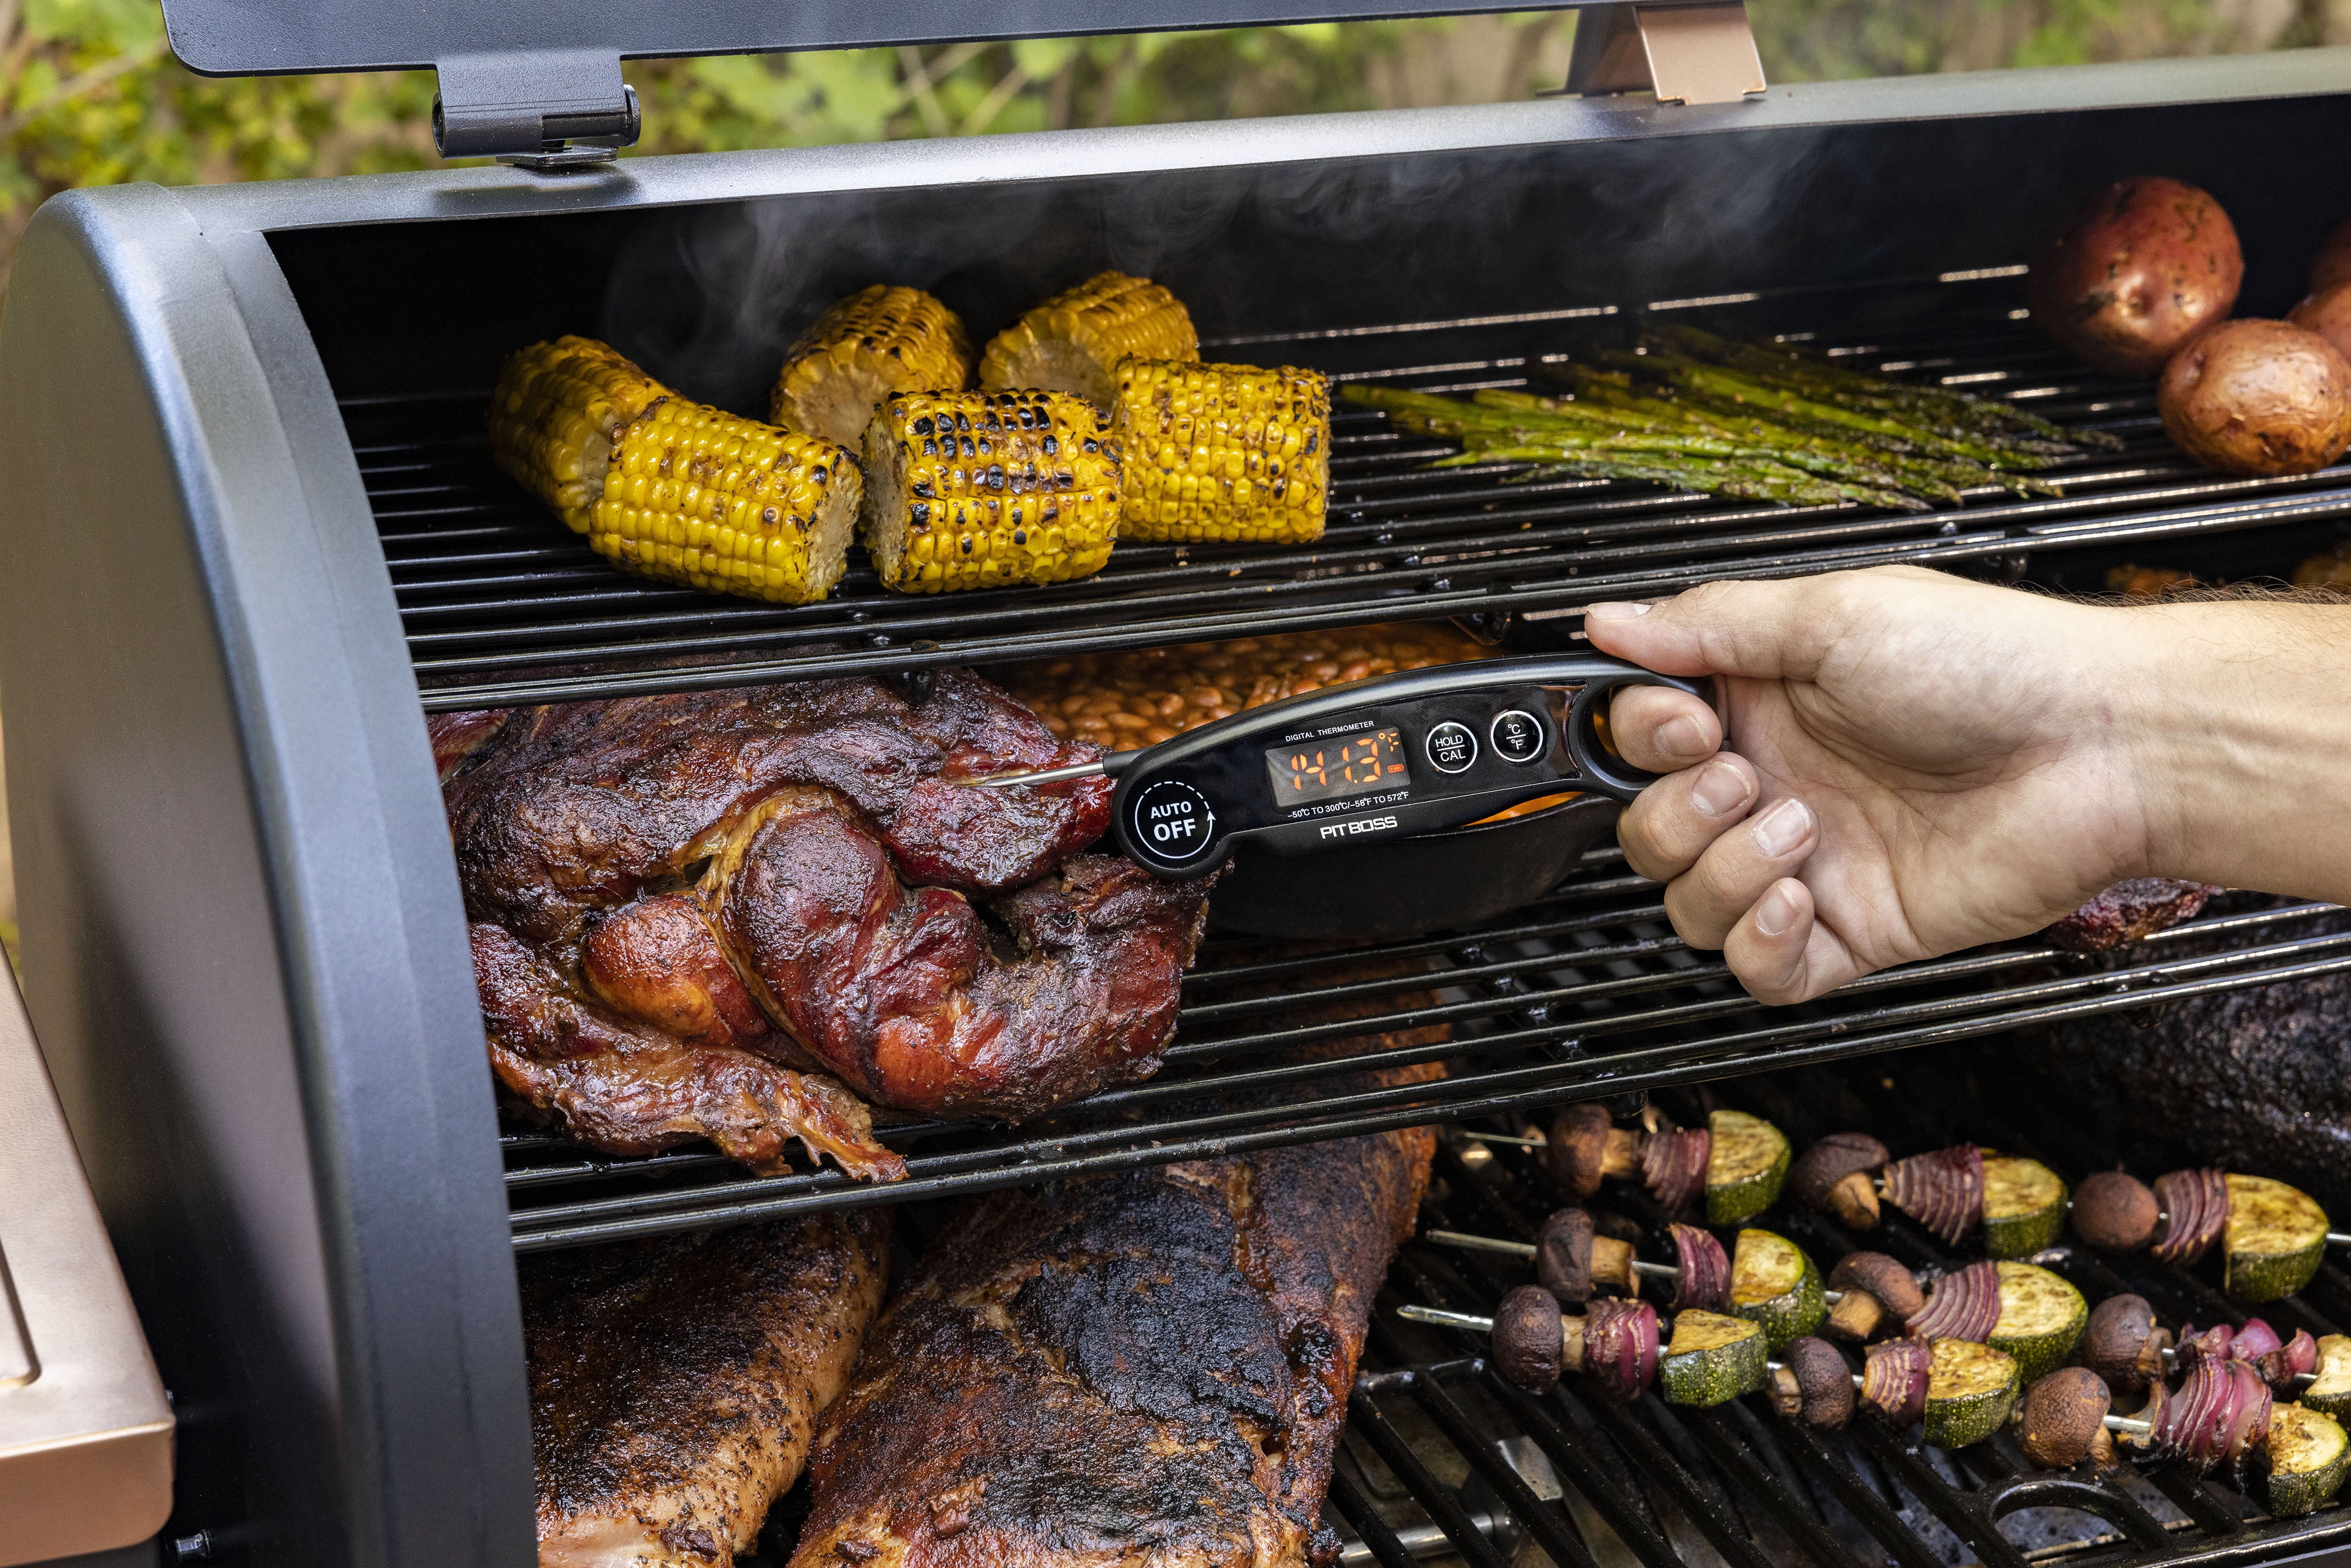 Pit Boss Remote Grill Thermometer Plastic Accessory Kit in the Grilling  Tools & Utensils department at